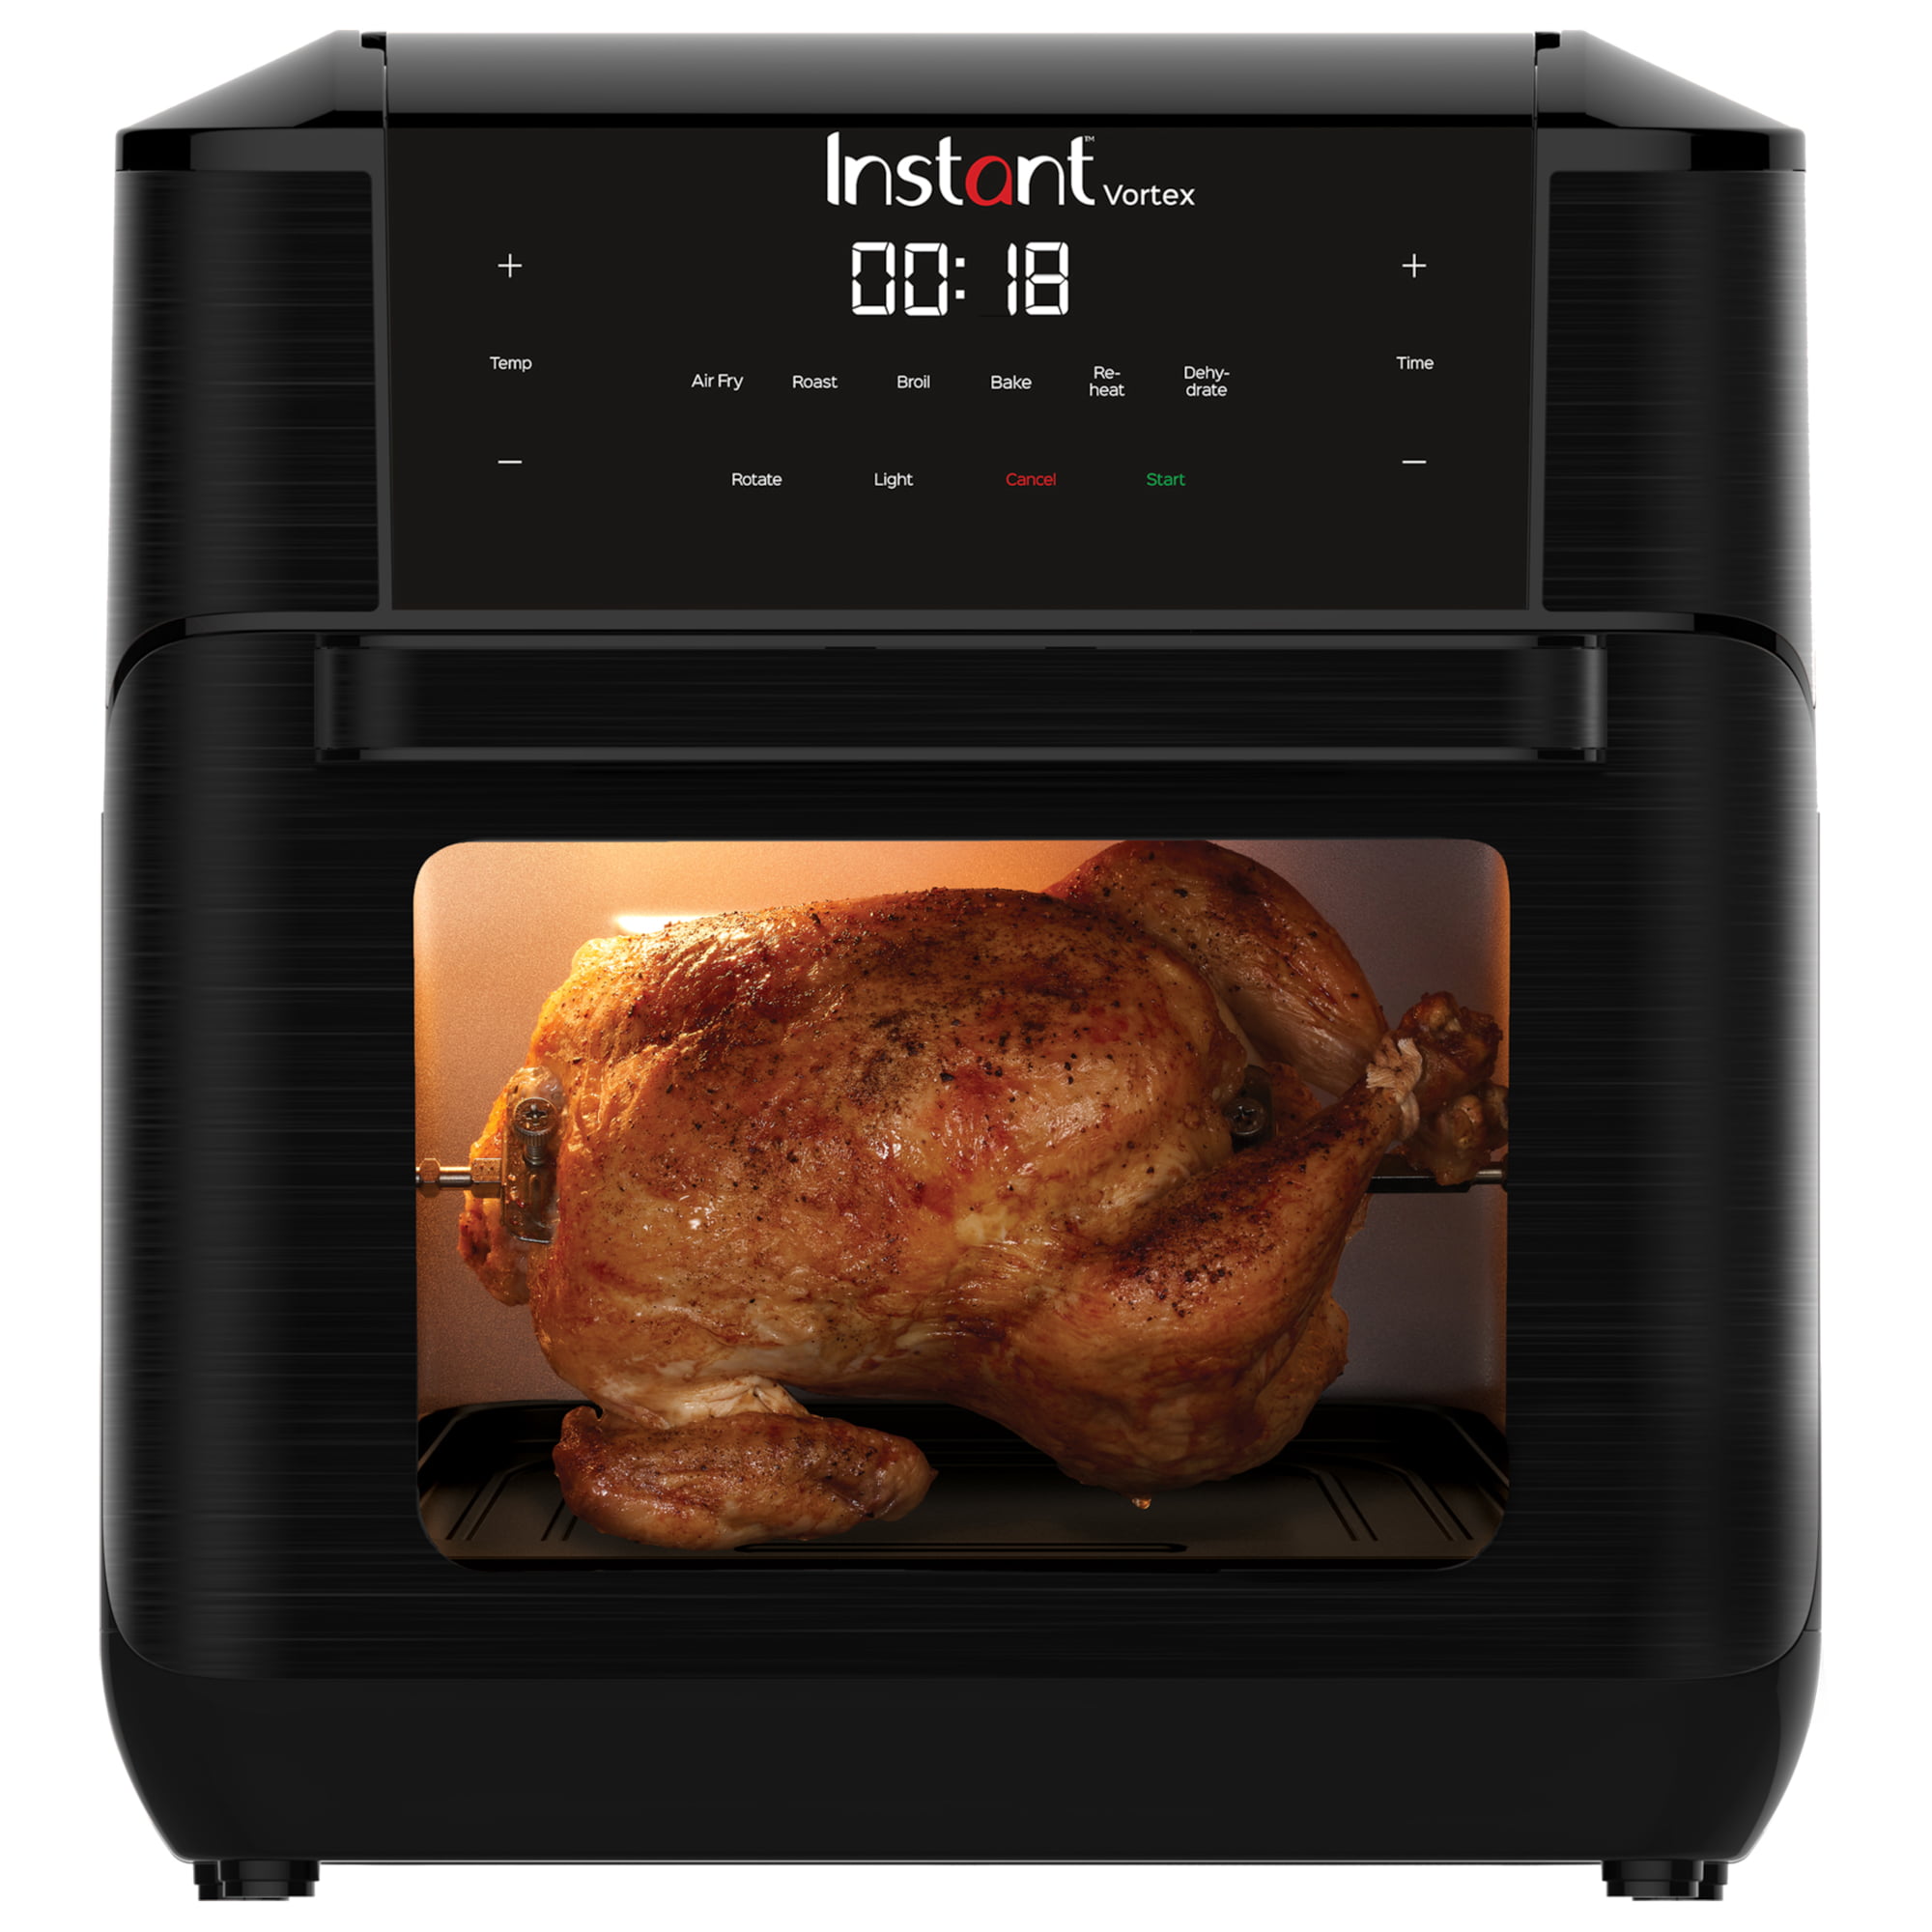 Instant Vortex Air fryer with a cooked chicken inside